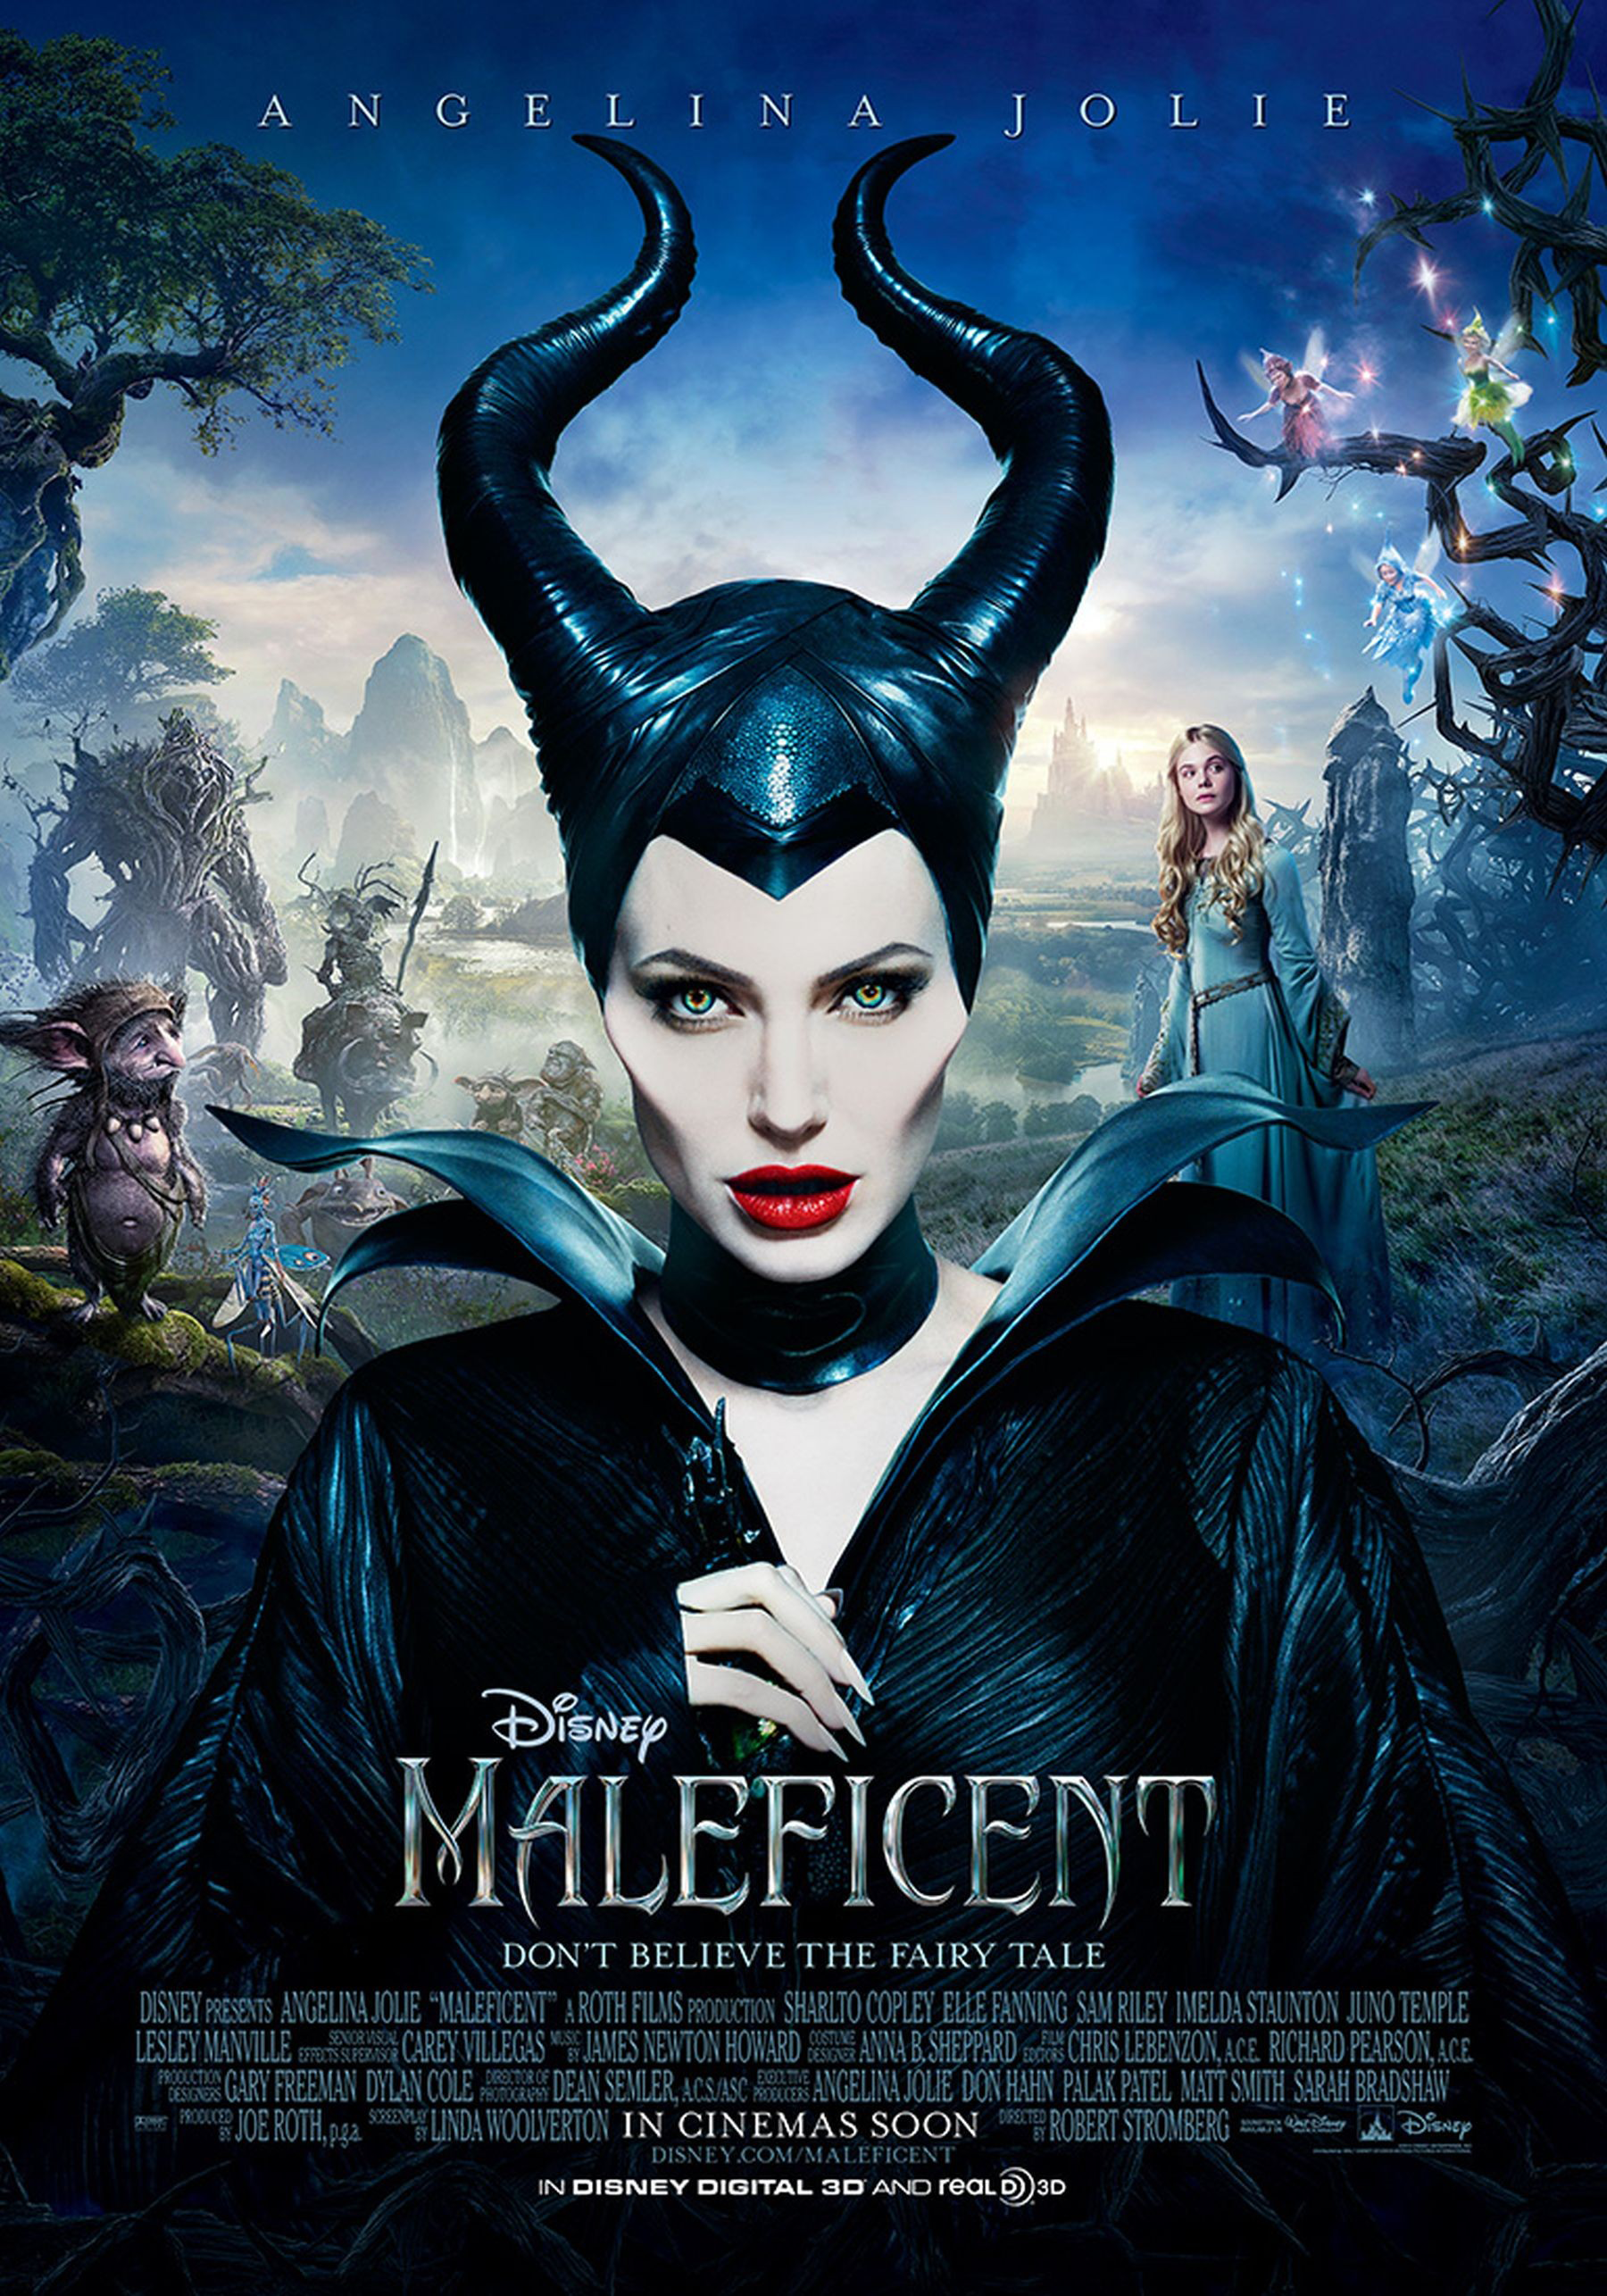 "Maleficent" movie poster. Image courtesy of Disney.